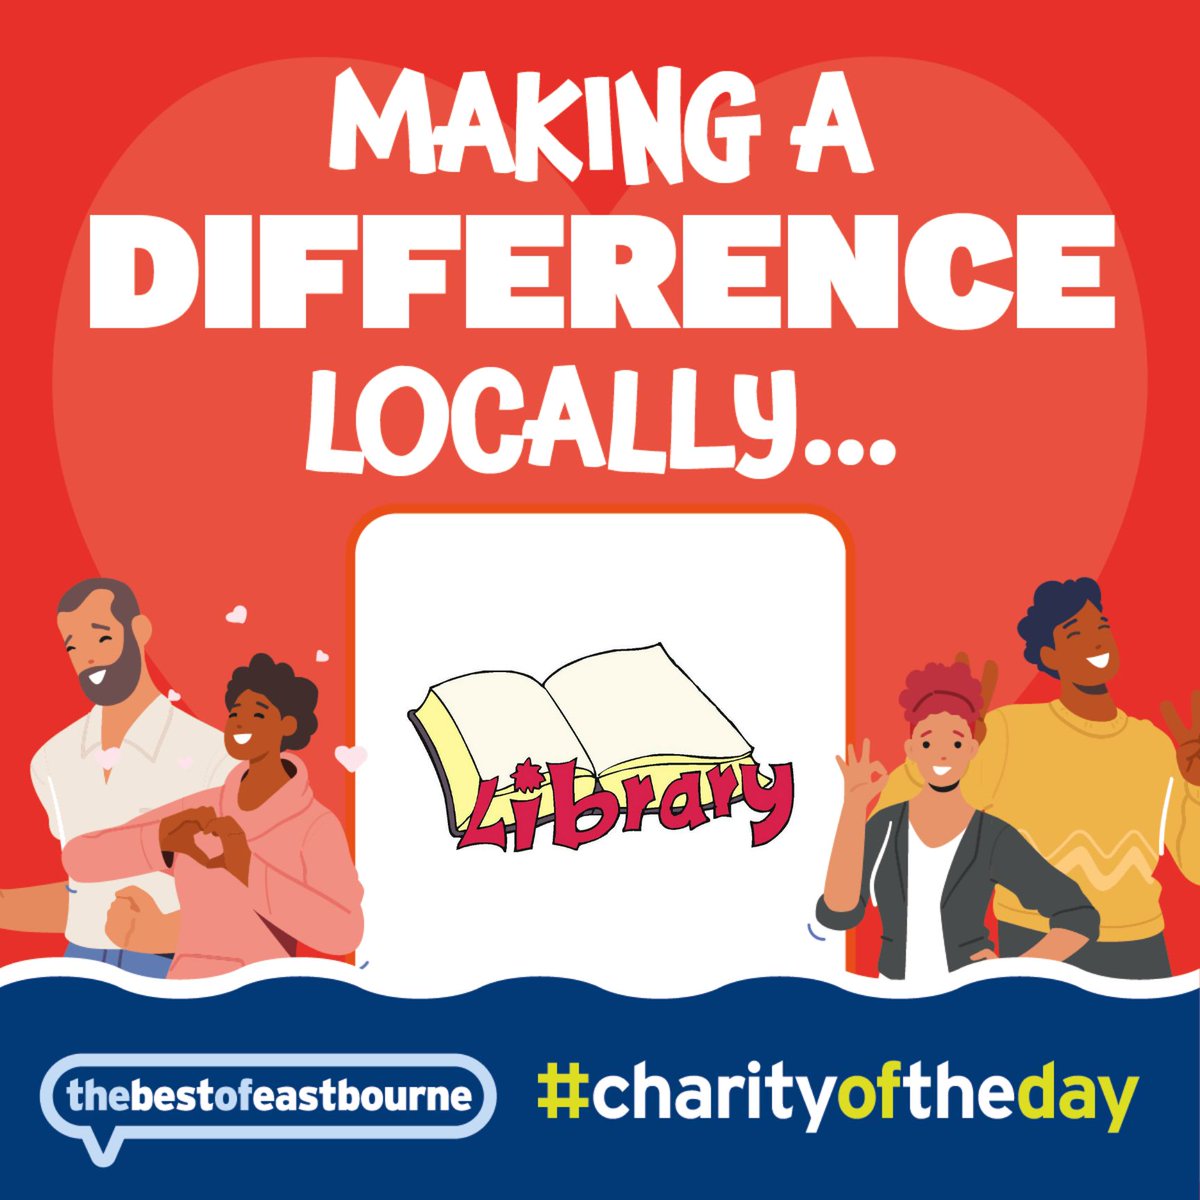 🤝 Making a difference locally 💙 Please show your support for @OldTownLibrary, you can find out more about this local charity in our Community Guide bit.ly/2R2tc88 #BestOfEastbourne #CharityOfTheDay #EastbourneCharity #EBcharity #EastbourneVolunteer